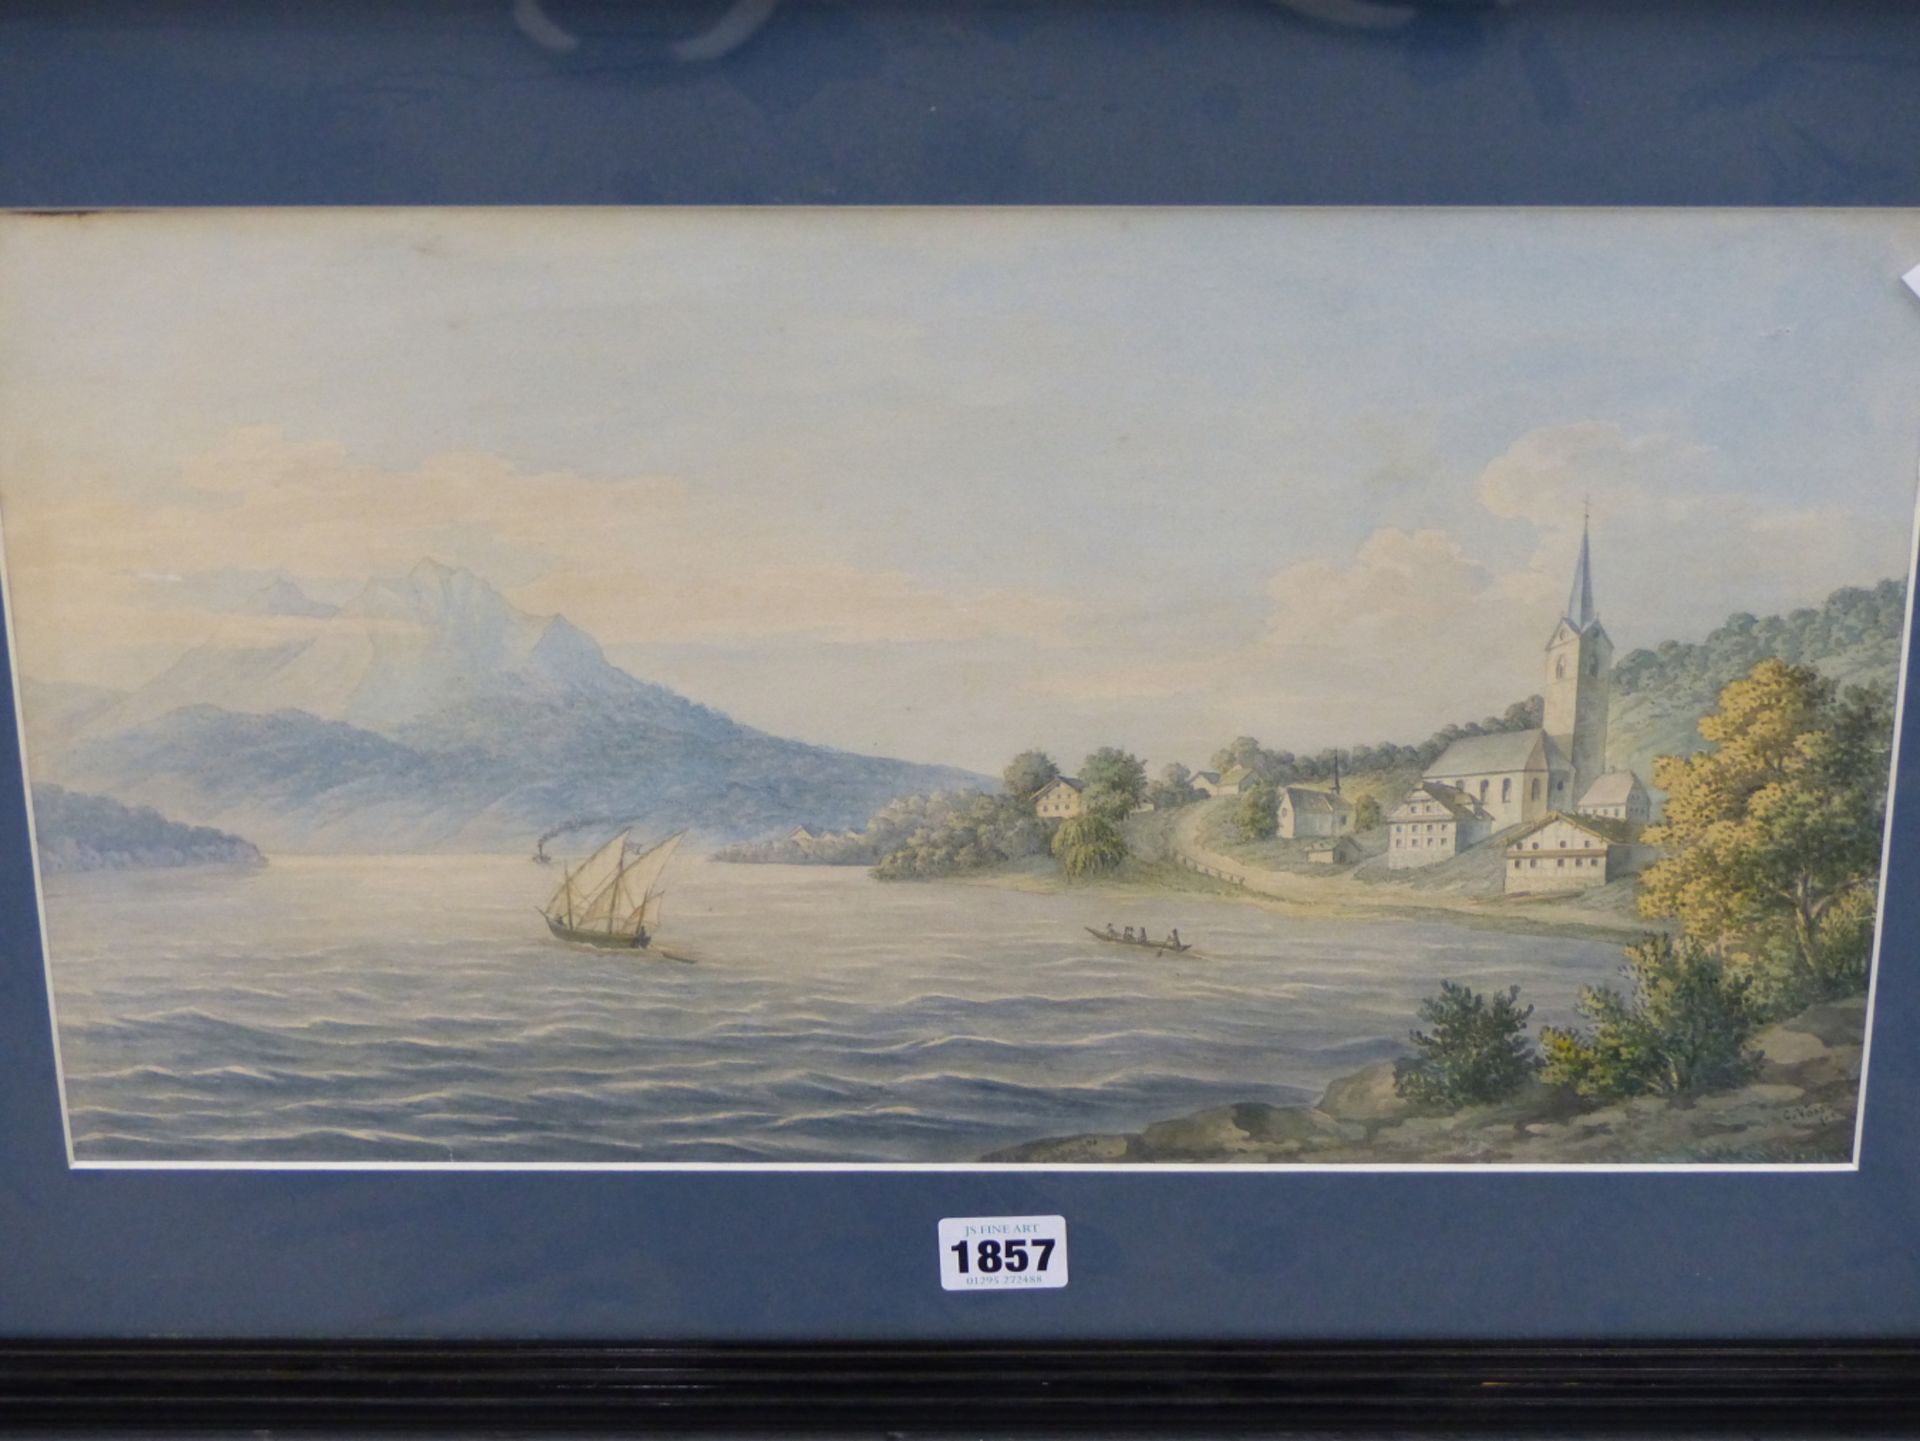 C. VOSS (19TH CENTURY), MOUNTAINOUS LANDSCAPE WITH BOATS ON A LAKE, SIGNED, WATERCOLOUR, 43 X 25. - Image 2 of 4